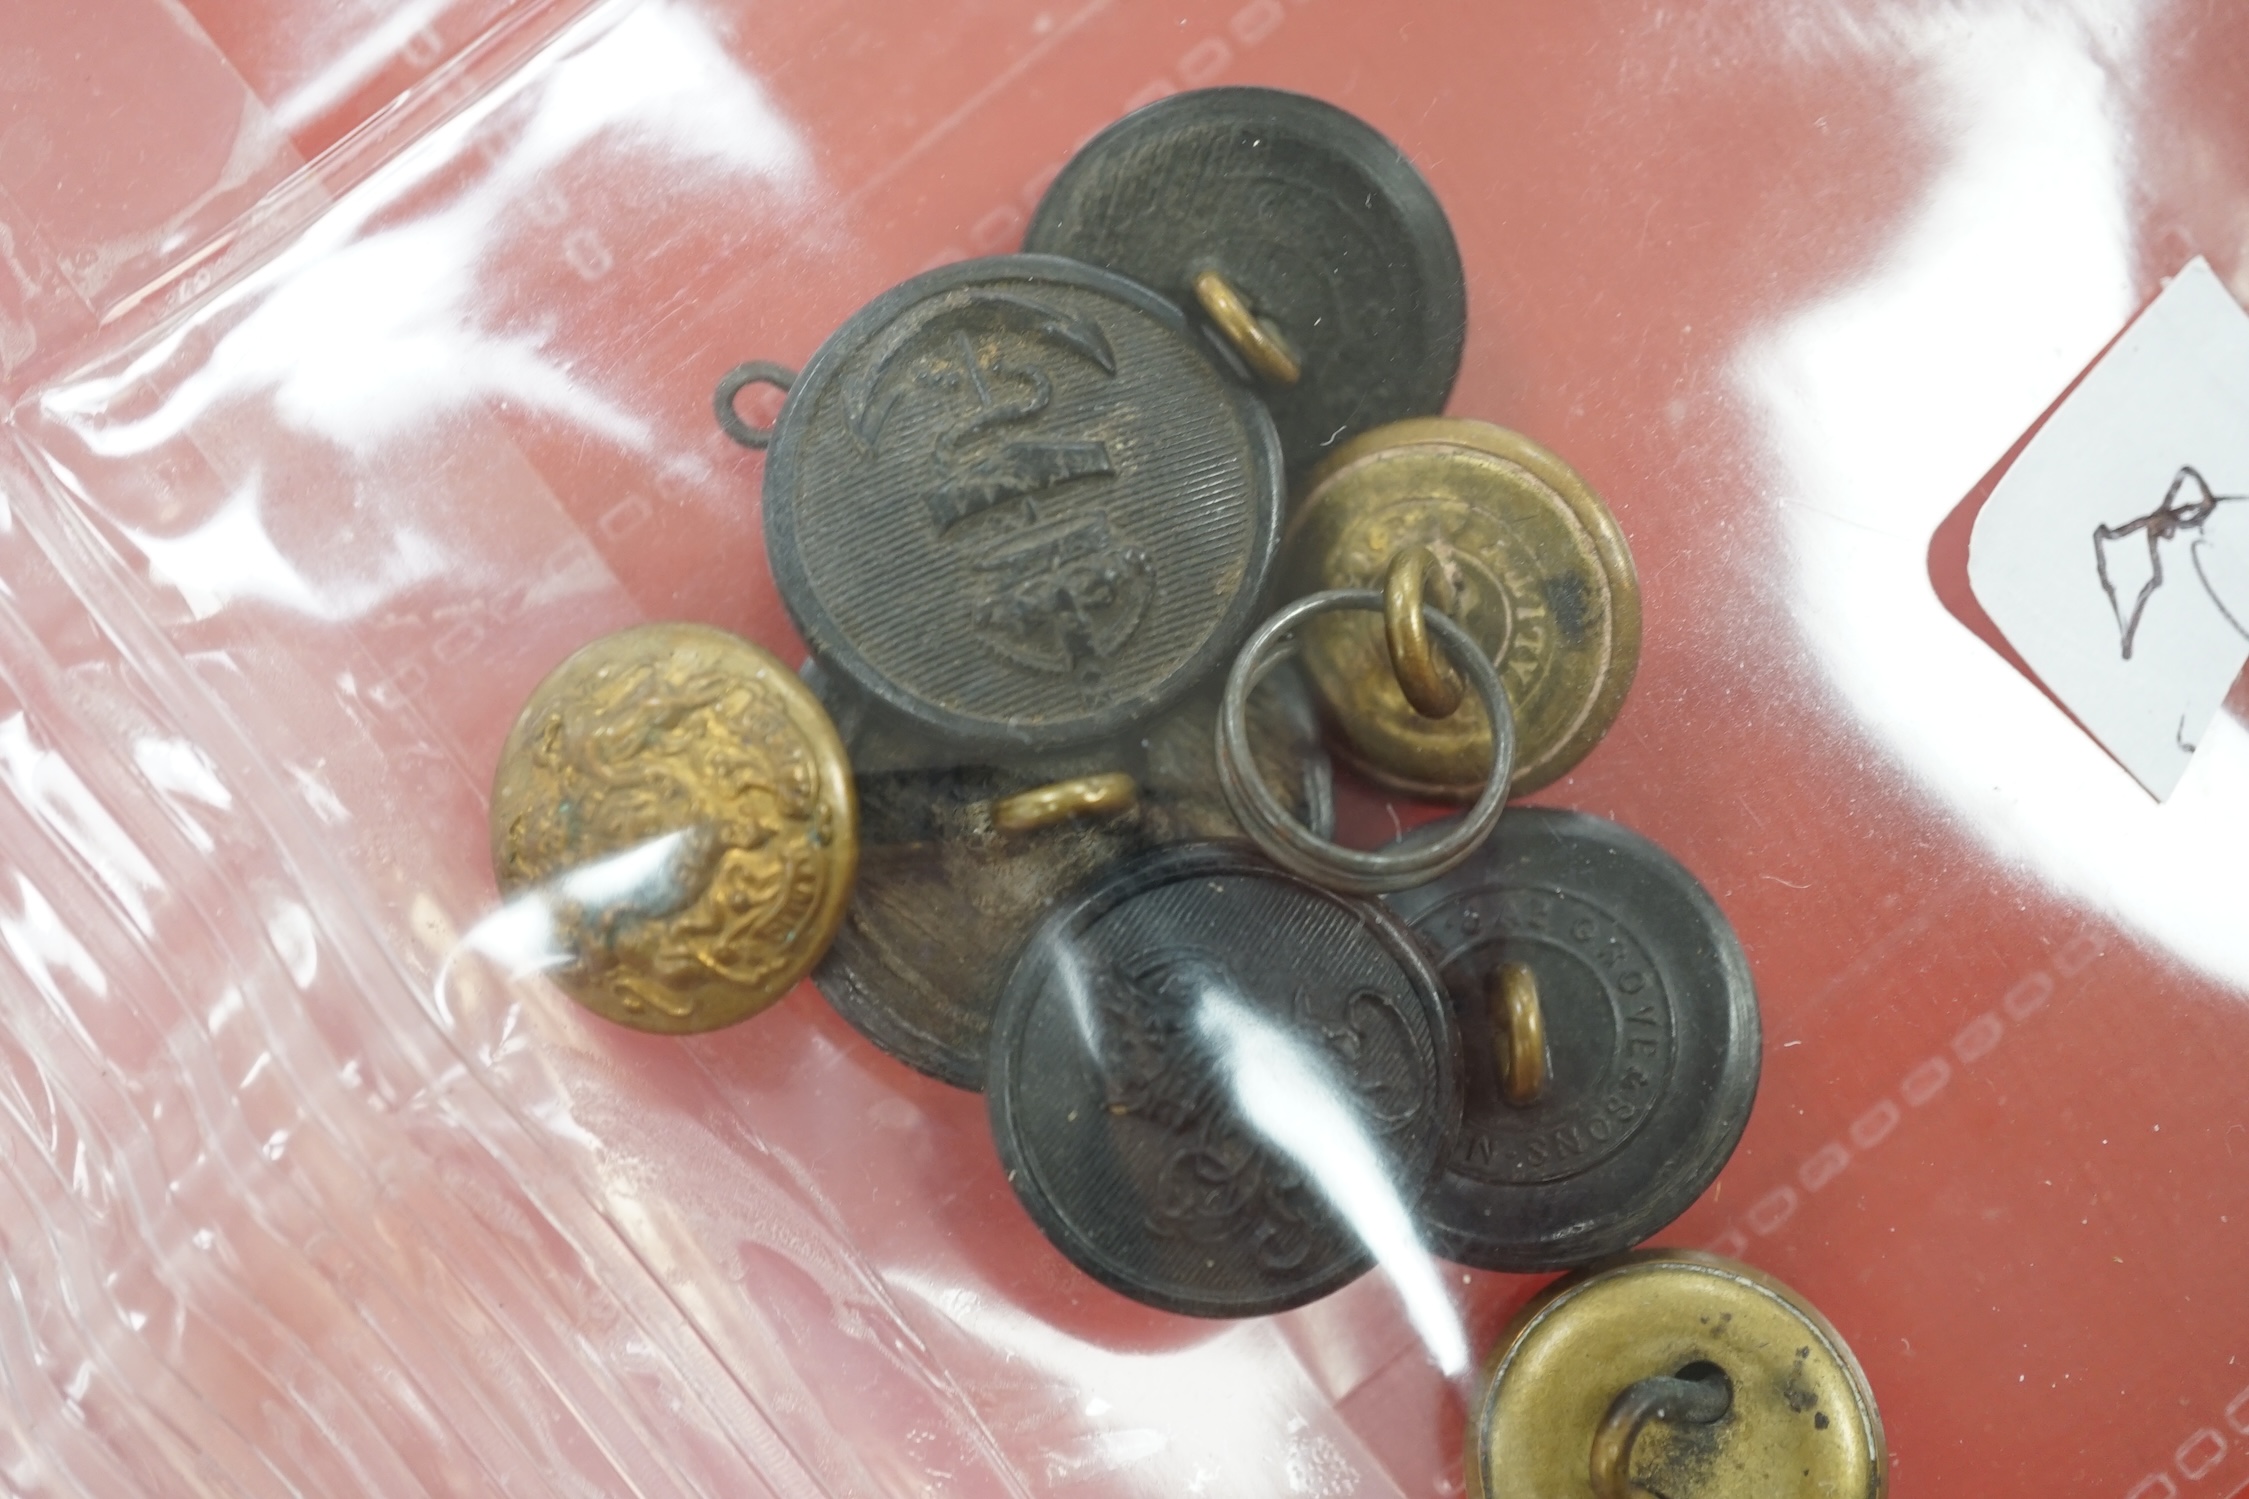 A collection of Police badges and buttons, including to Eastbourne Borough Police helmet plates, Eastbourne Fire Brigade uniform buttons, Royal Navy buttons, a whistle, etc. together with a batten decorated with beadwork